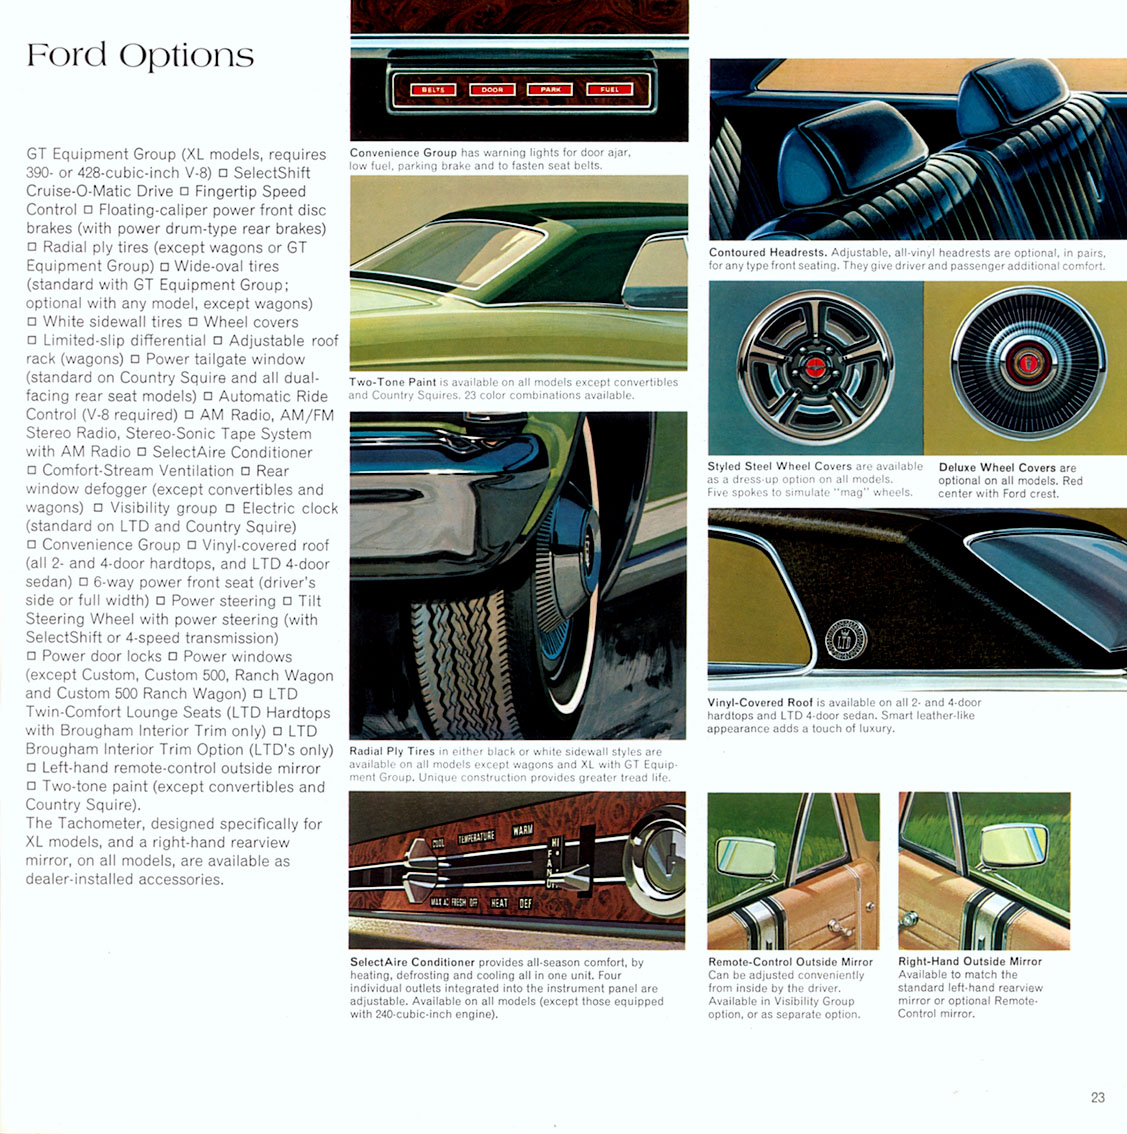 1968 Ford Brochure Page 1